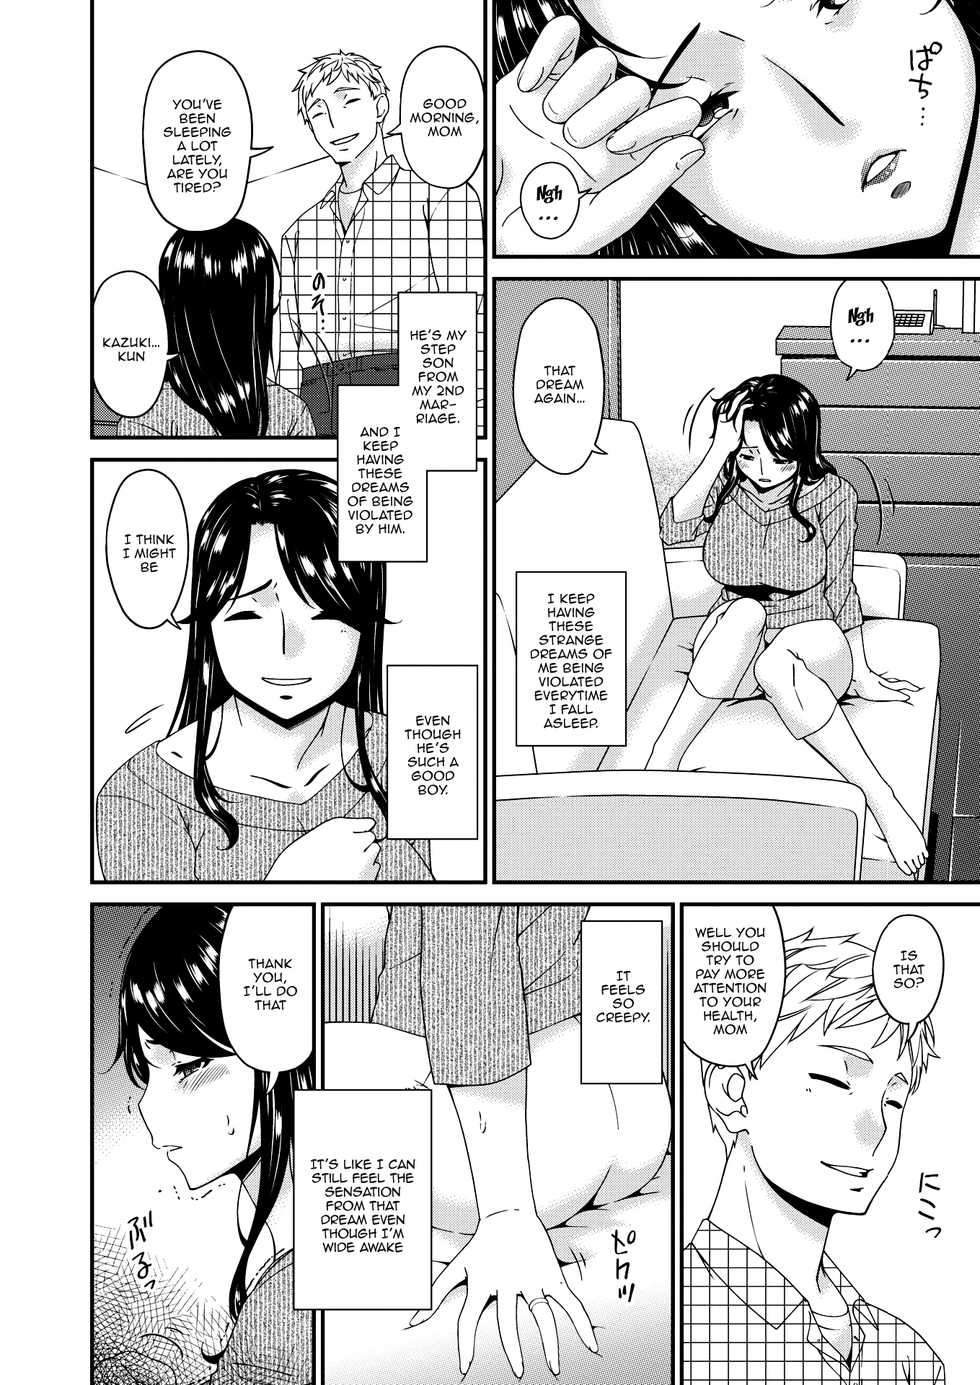 [Bai Asuka] Gibo, Omou Toki... | When I Started Thinking About My Mother-In-Law... (COMIC HOTMILK 2020-04) [English] {Doujins.com} [Digital] - Page 2